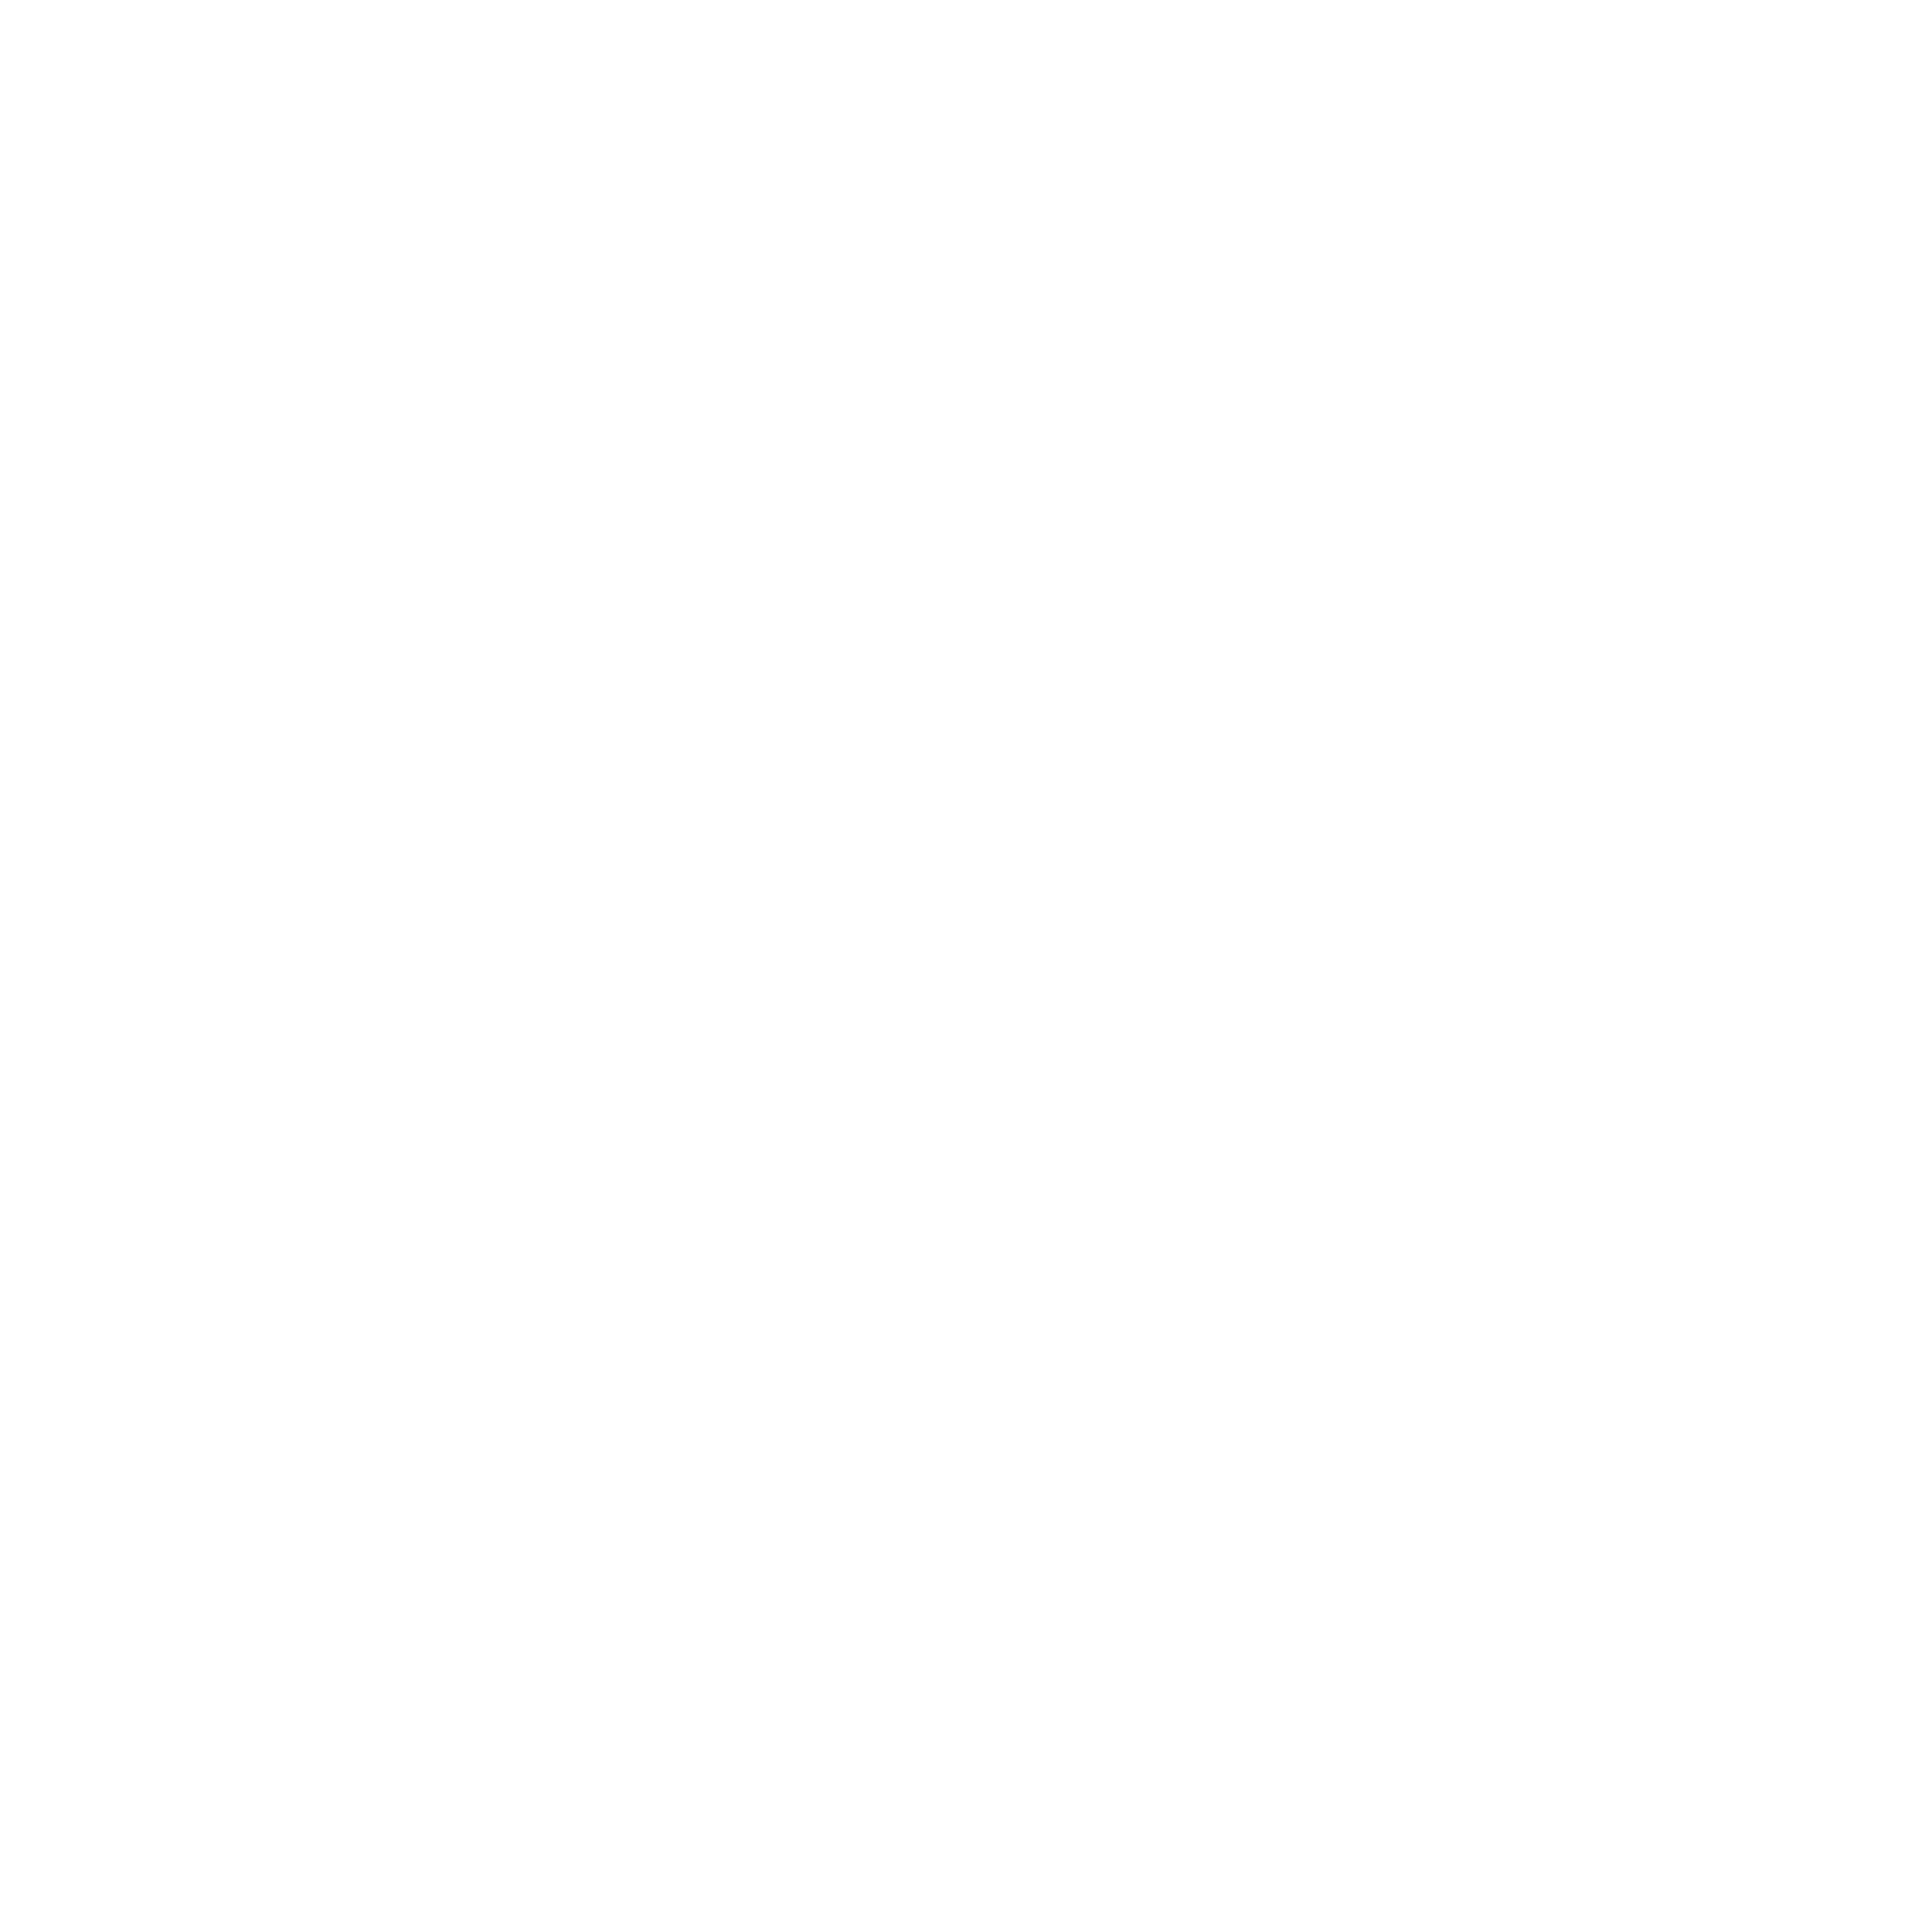 The Tox 